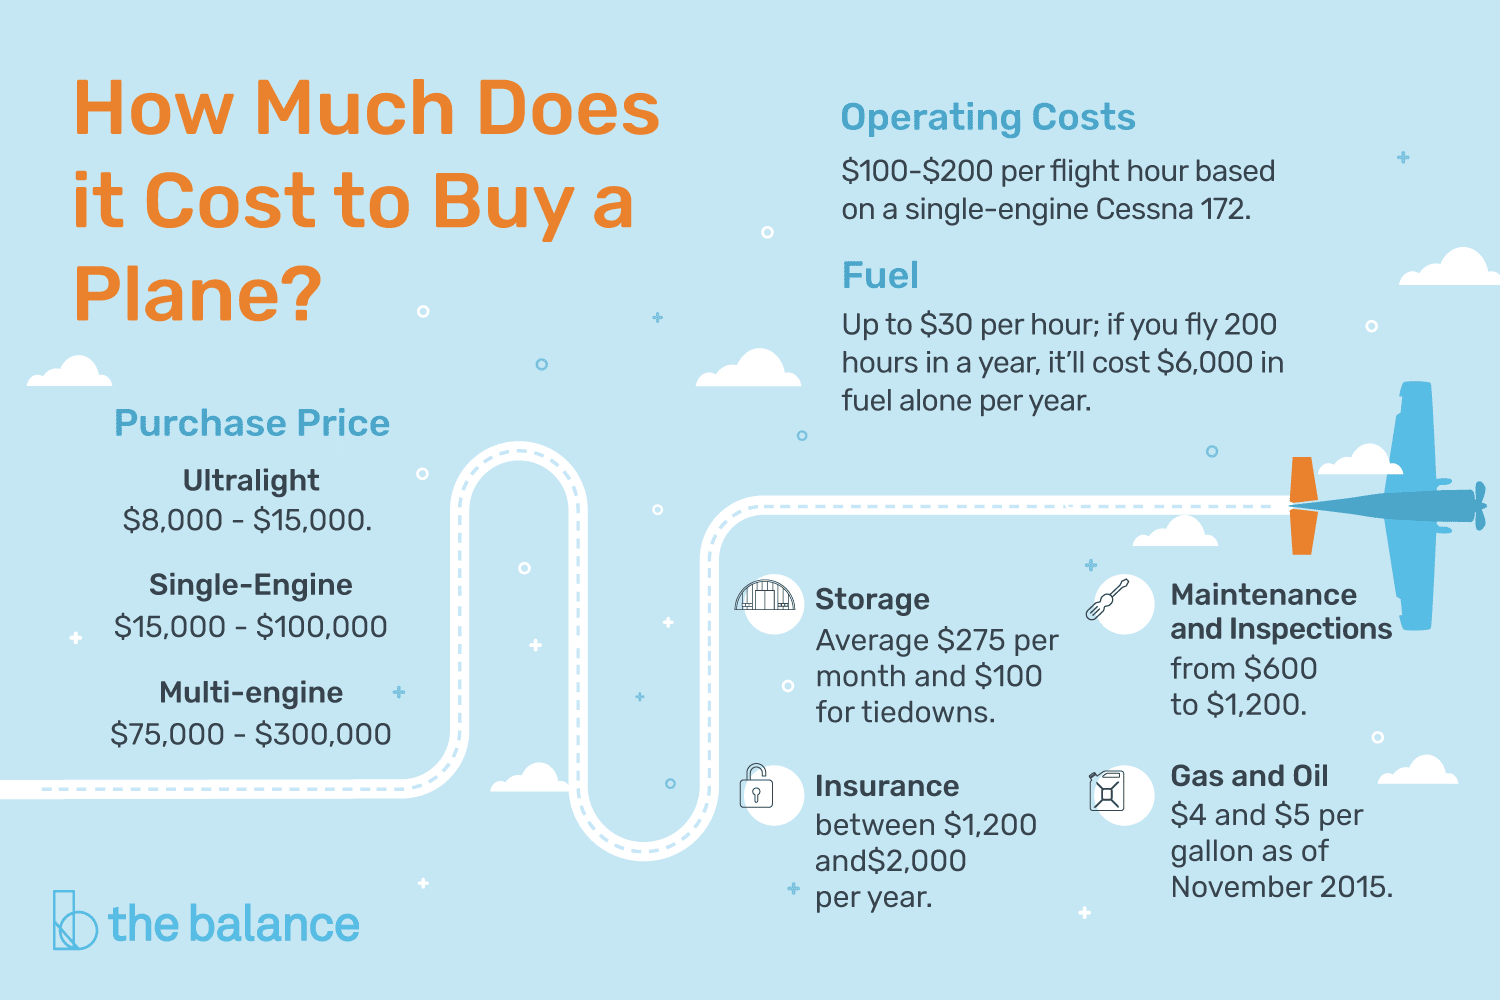 Aircraft Operating Costs Spreadsheet pertaining to How Much Does It Cost To Buy A Plane